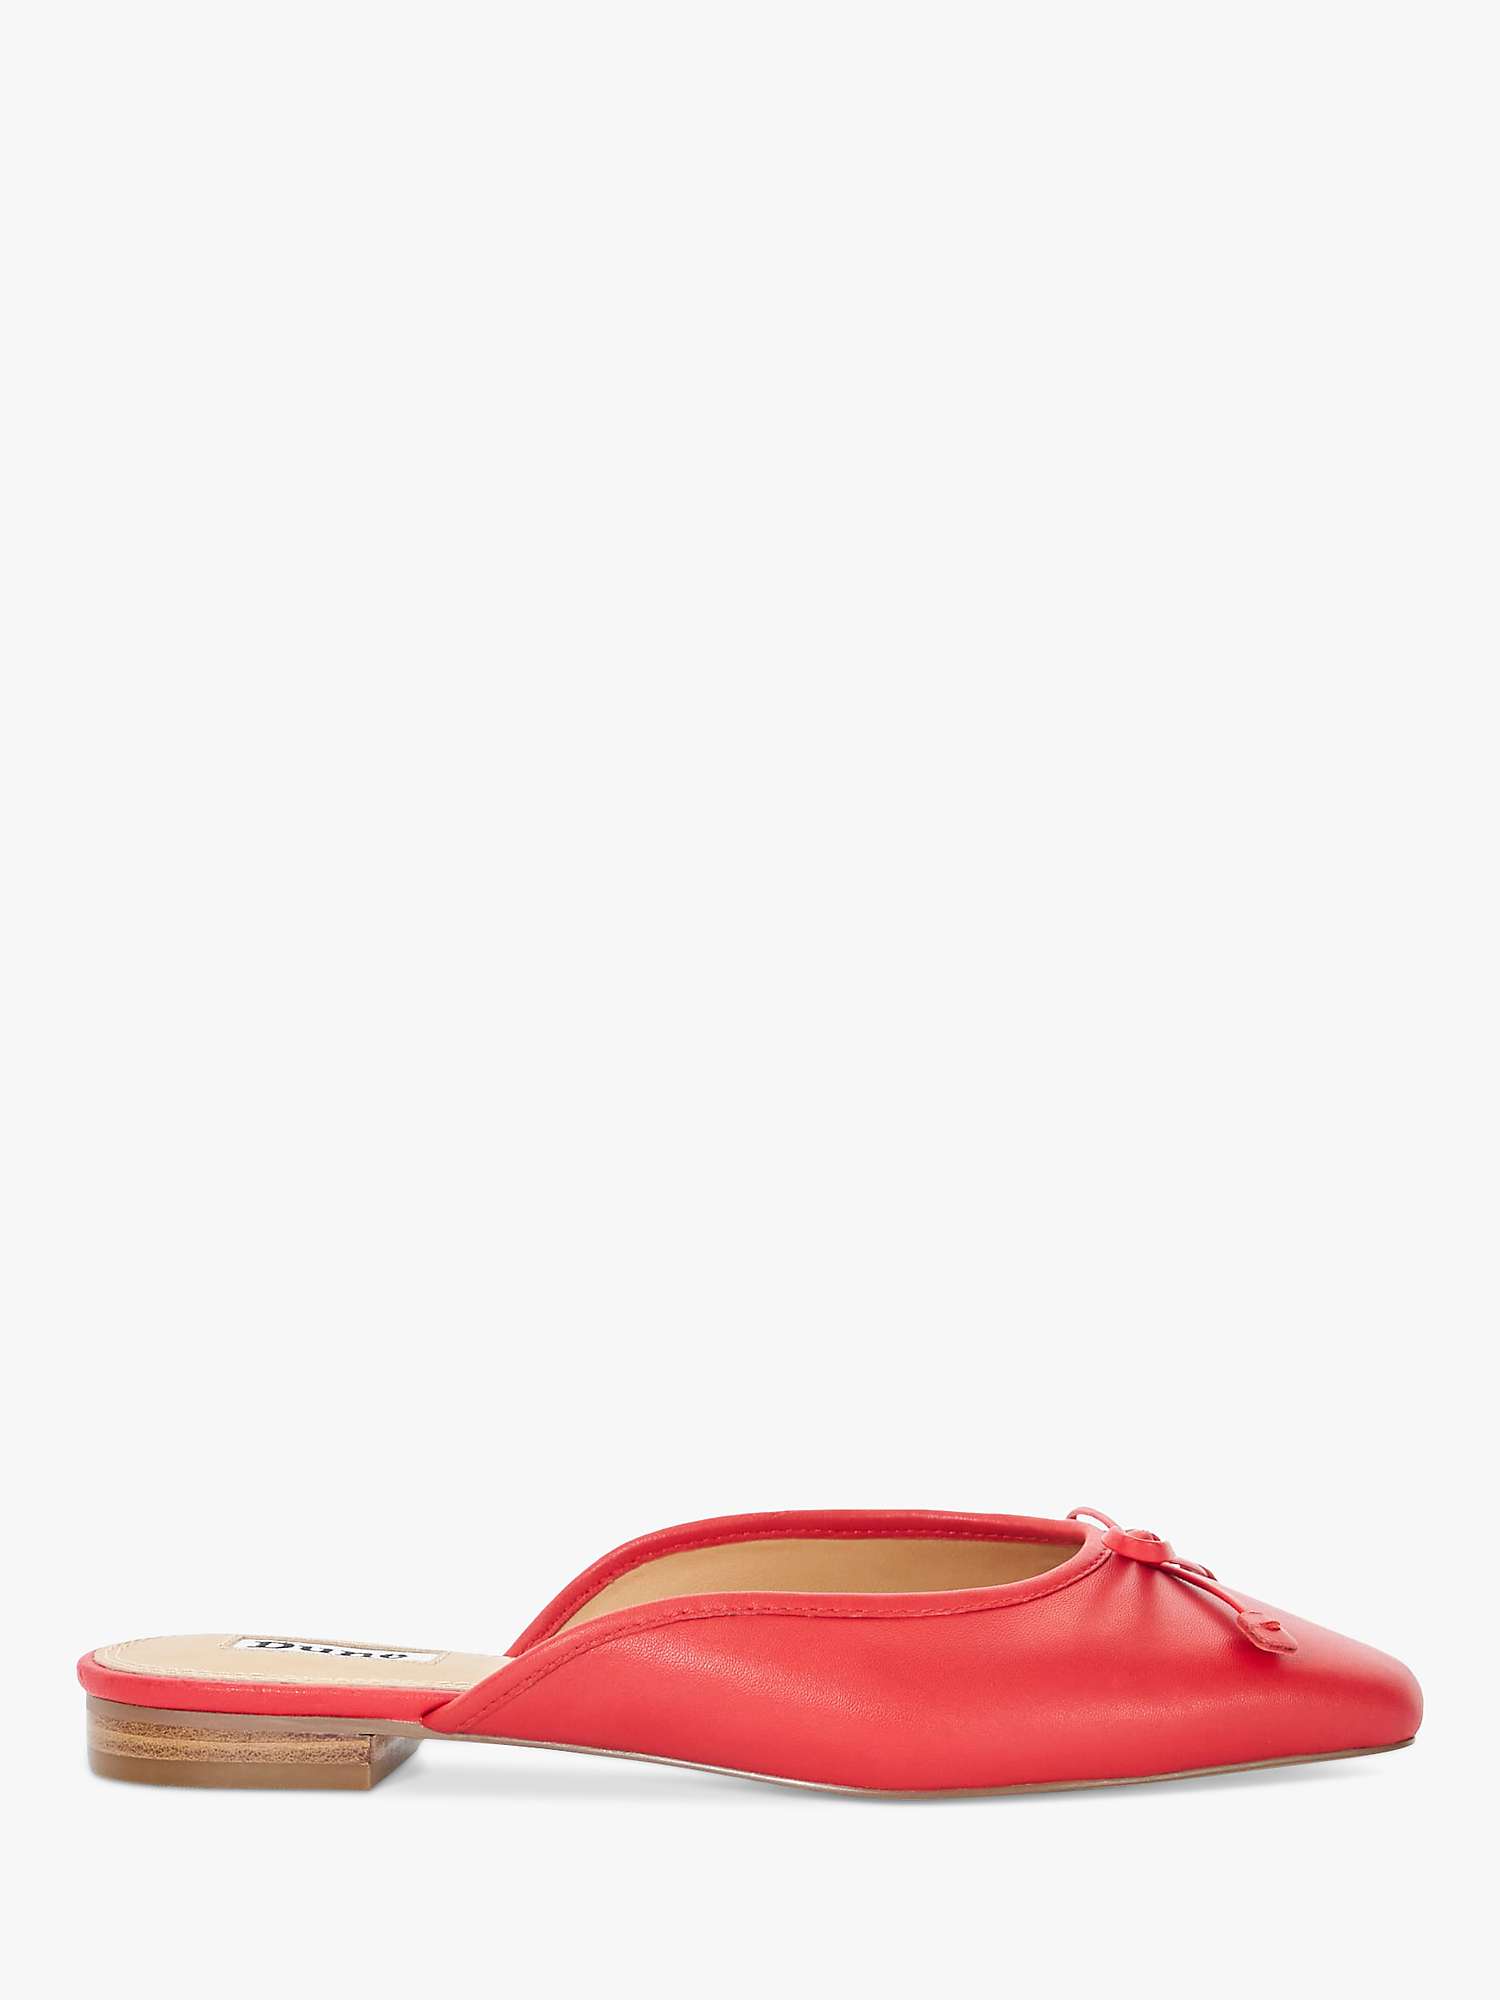 Buy Dune Haylas Leather Ballerina Mules, Red Online at johnlewis.com